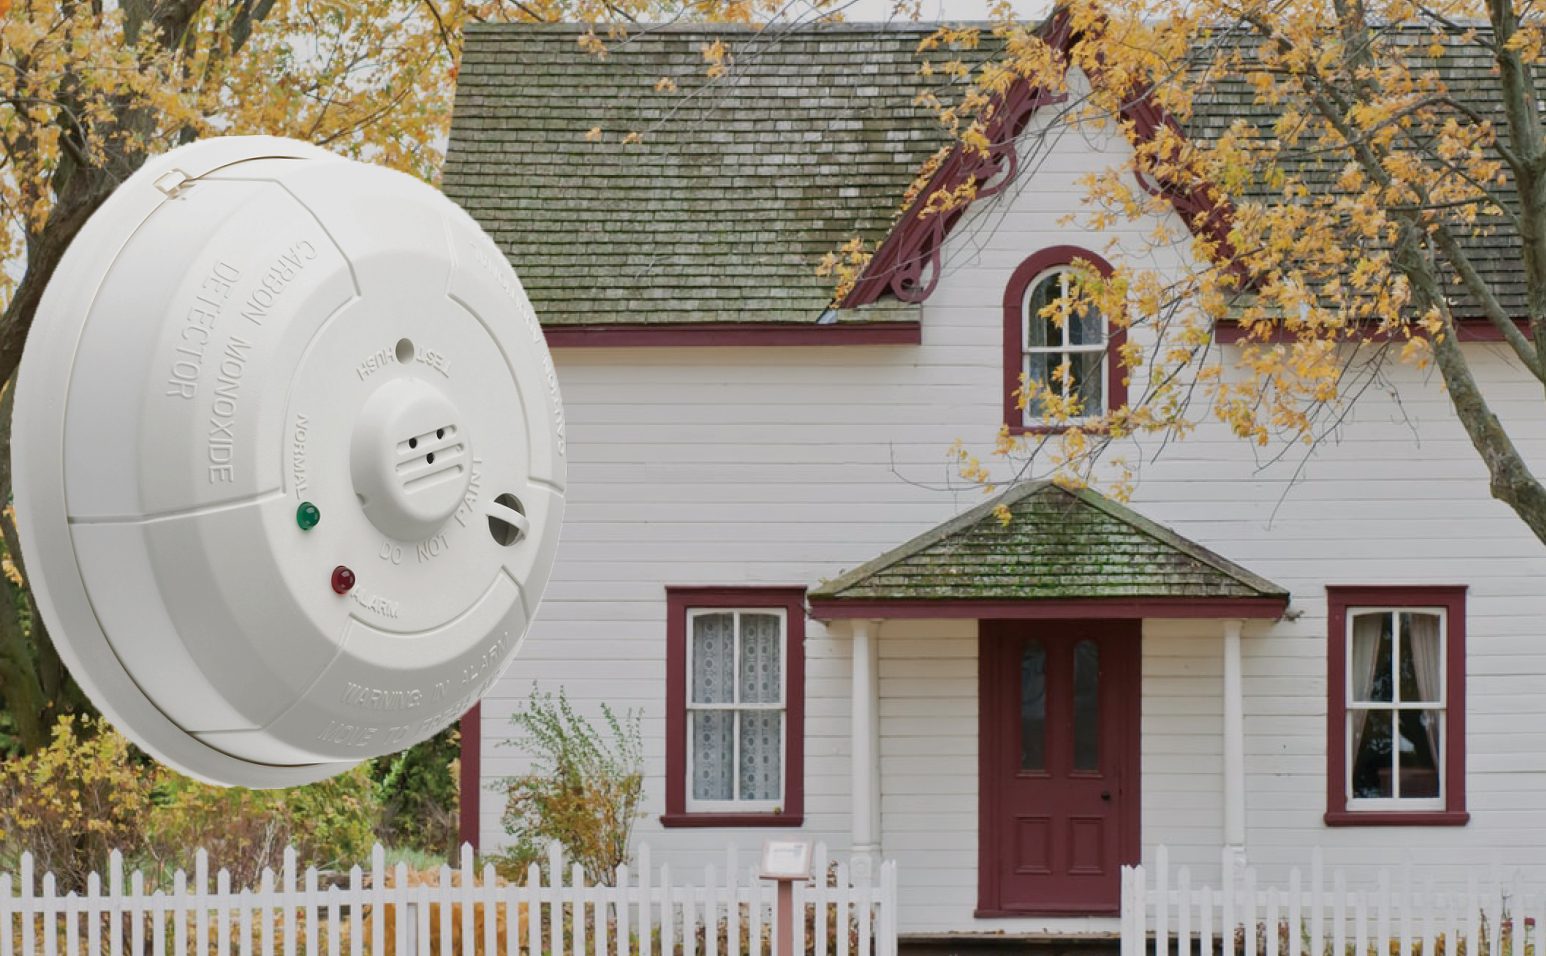 house in the autumn with a superimposed CO detector